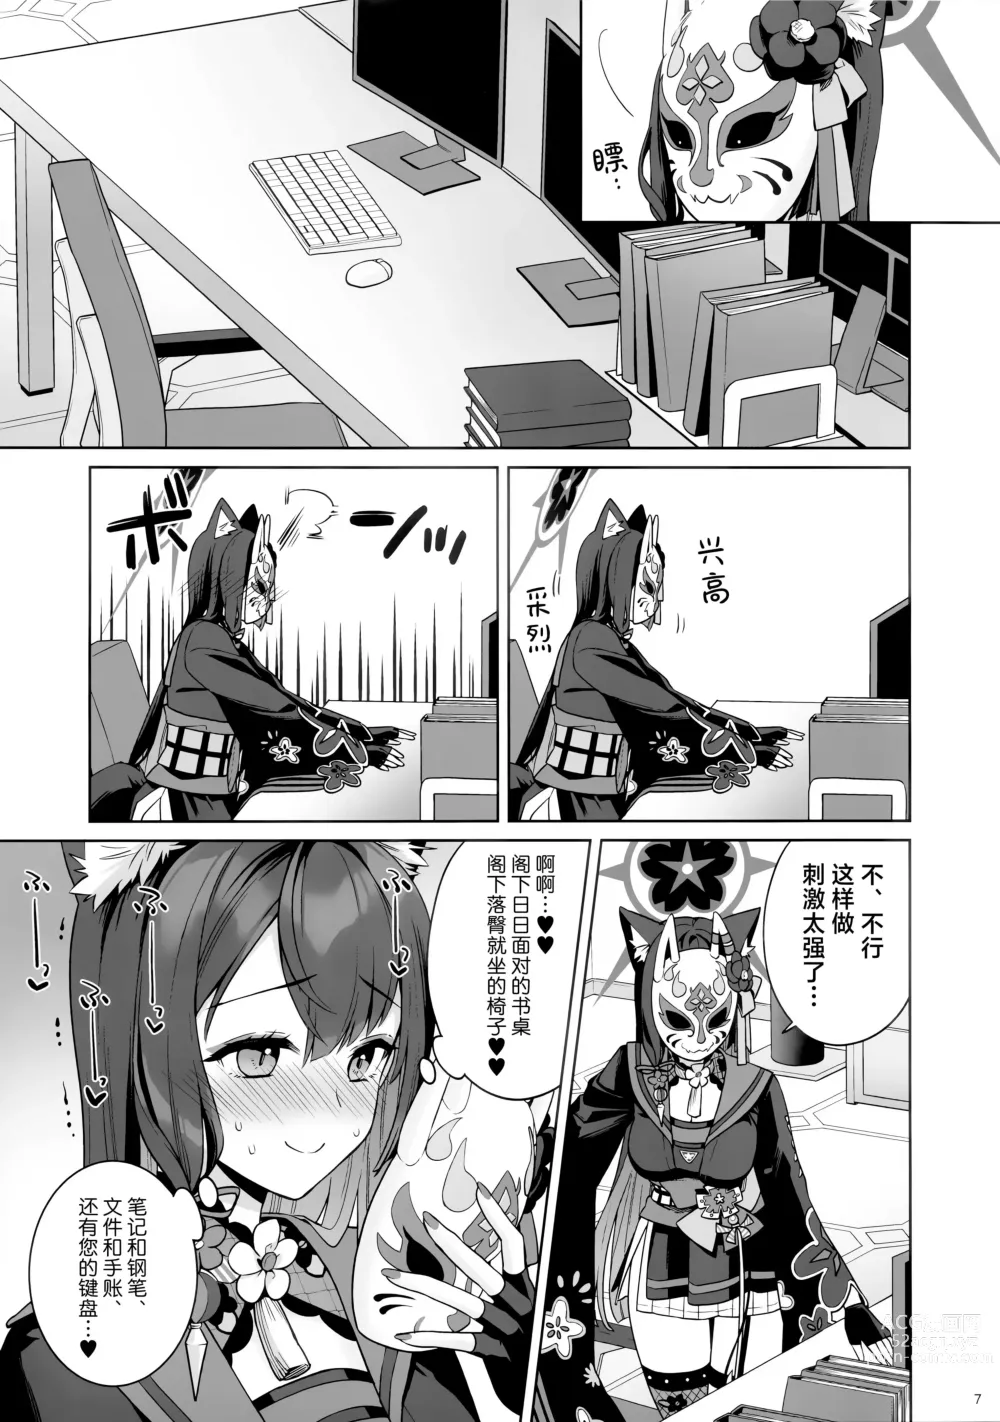 Page 6 of doujinshi 纯情·恋情·发情狐